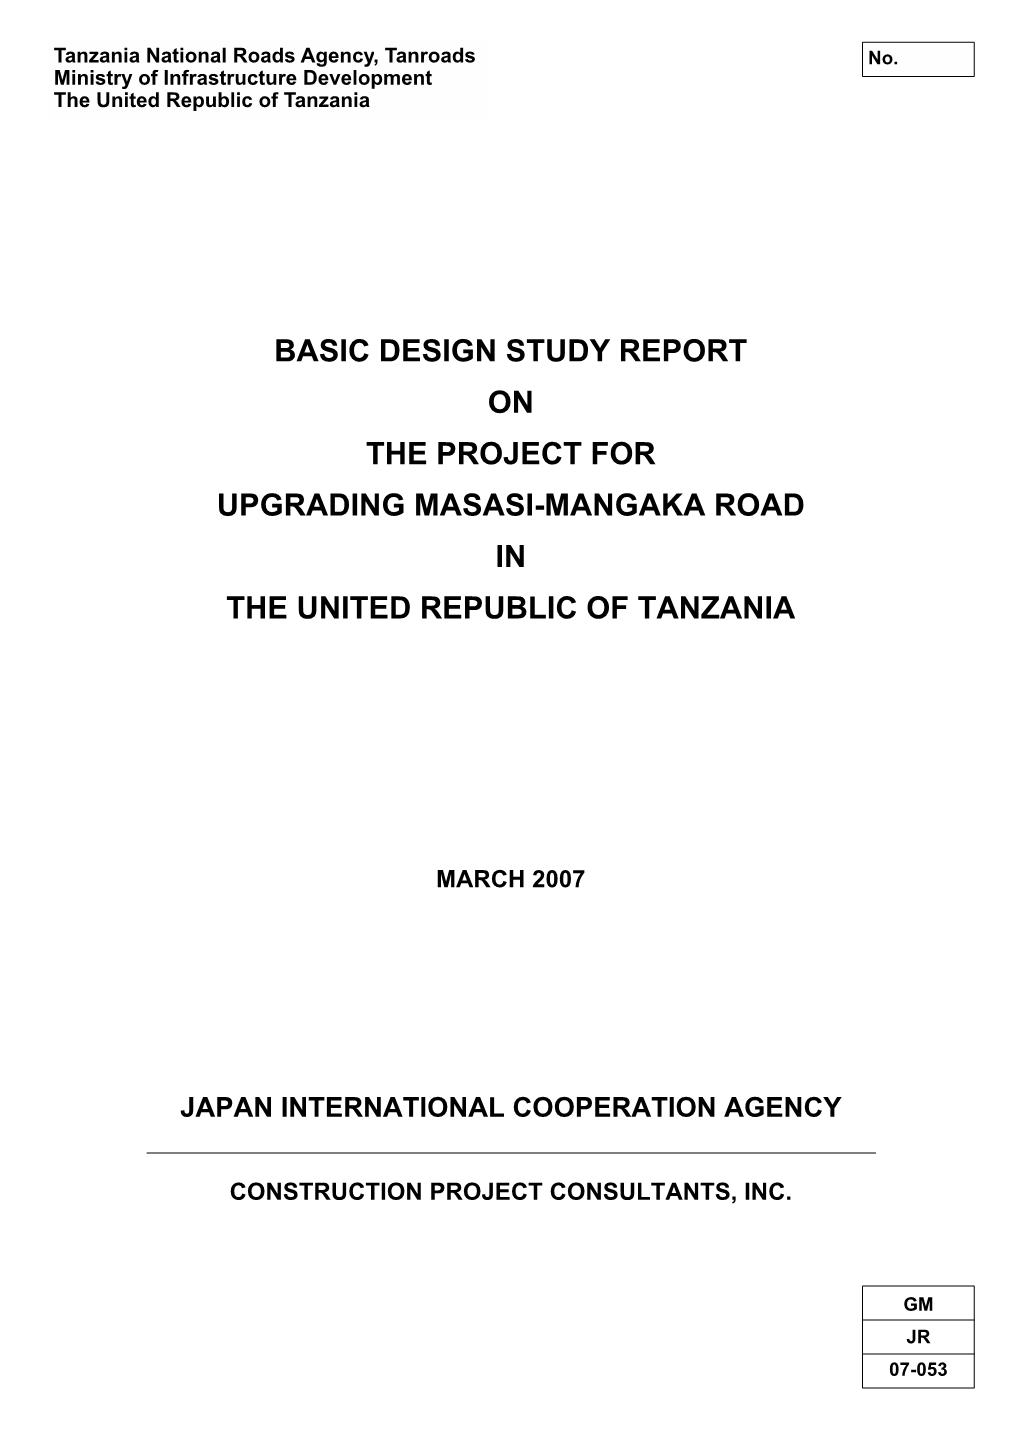 Basic Design Study Report on the Project for Upgrading Masasi-Mangaka Road in the United Republic of Tanzania